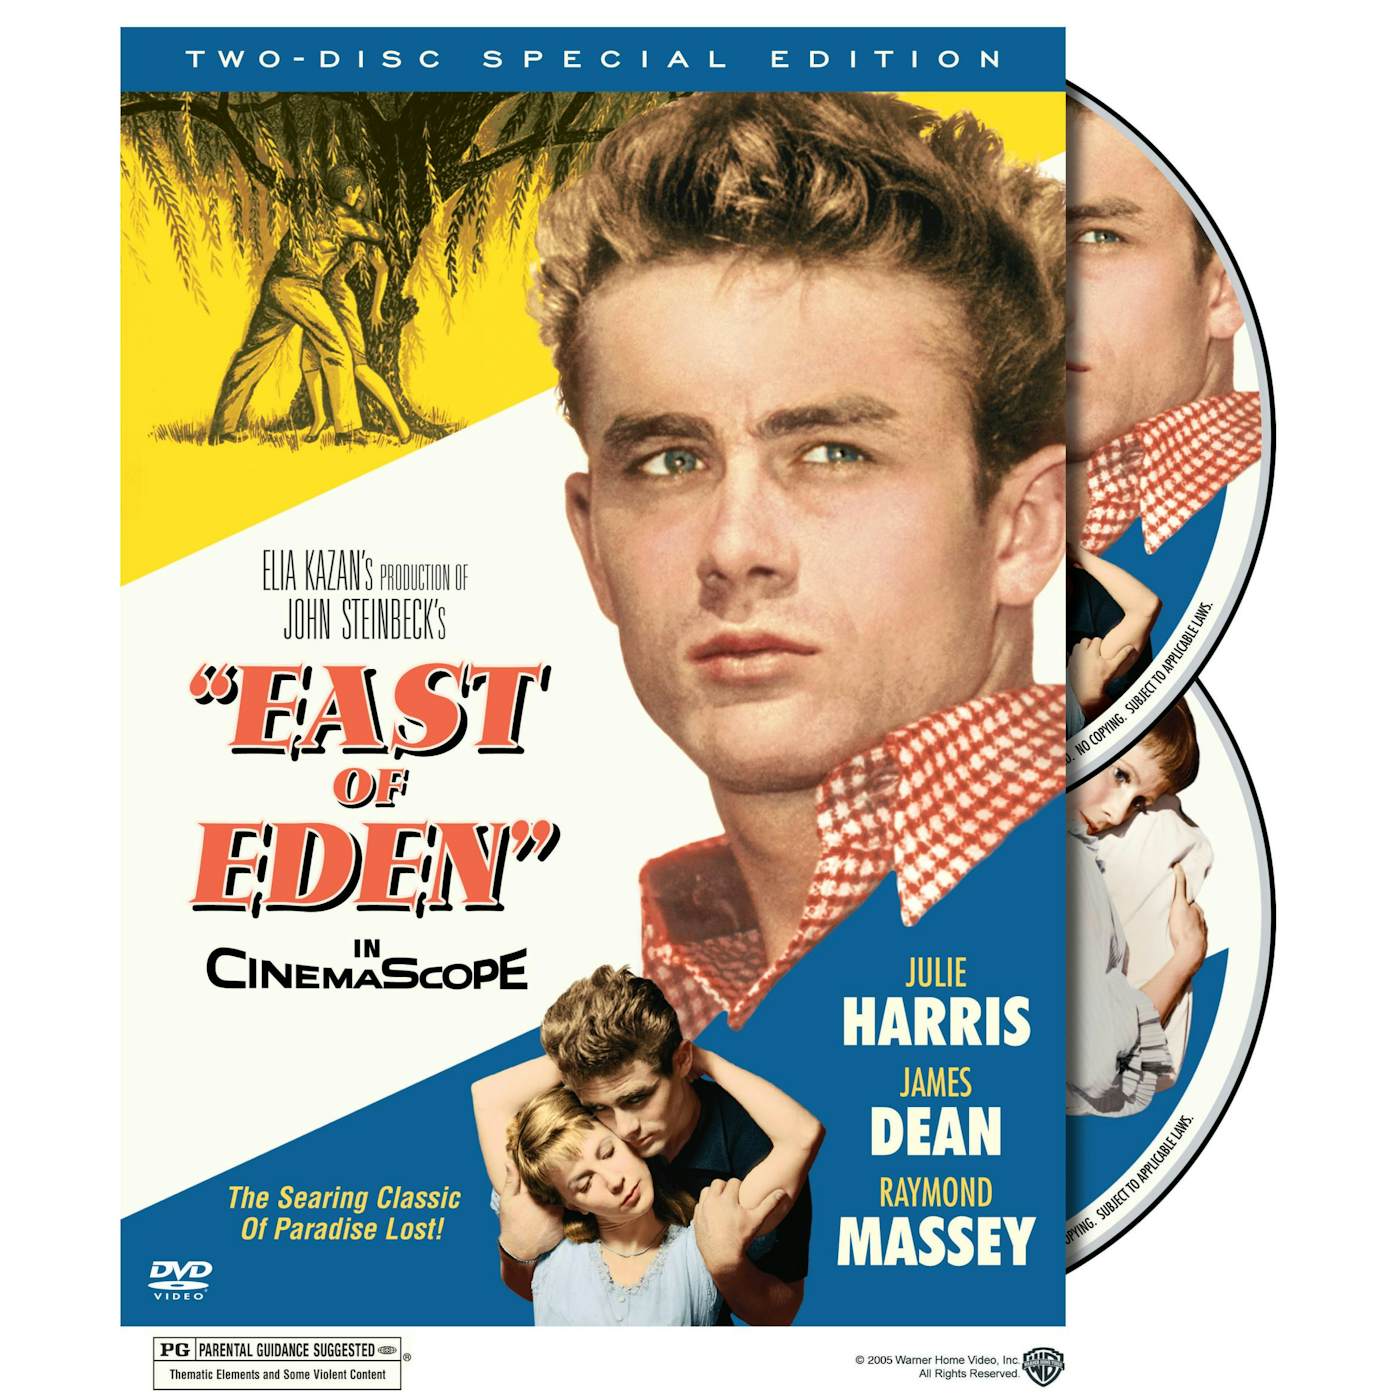 EAST OF EDEN (SPECIAL EDITION) DVD